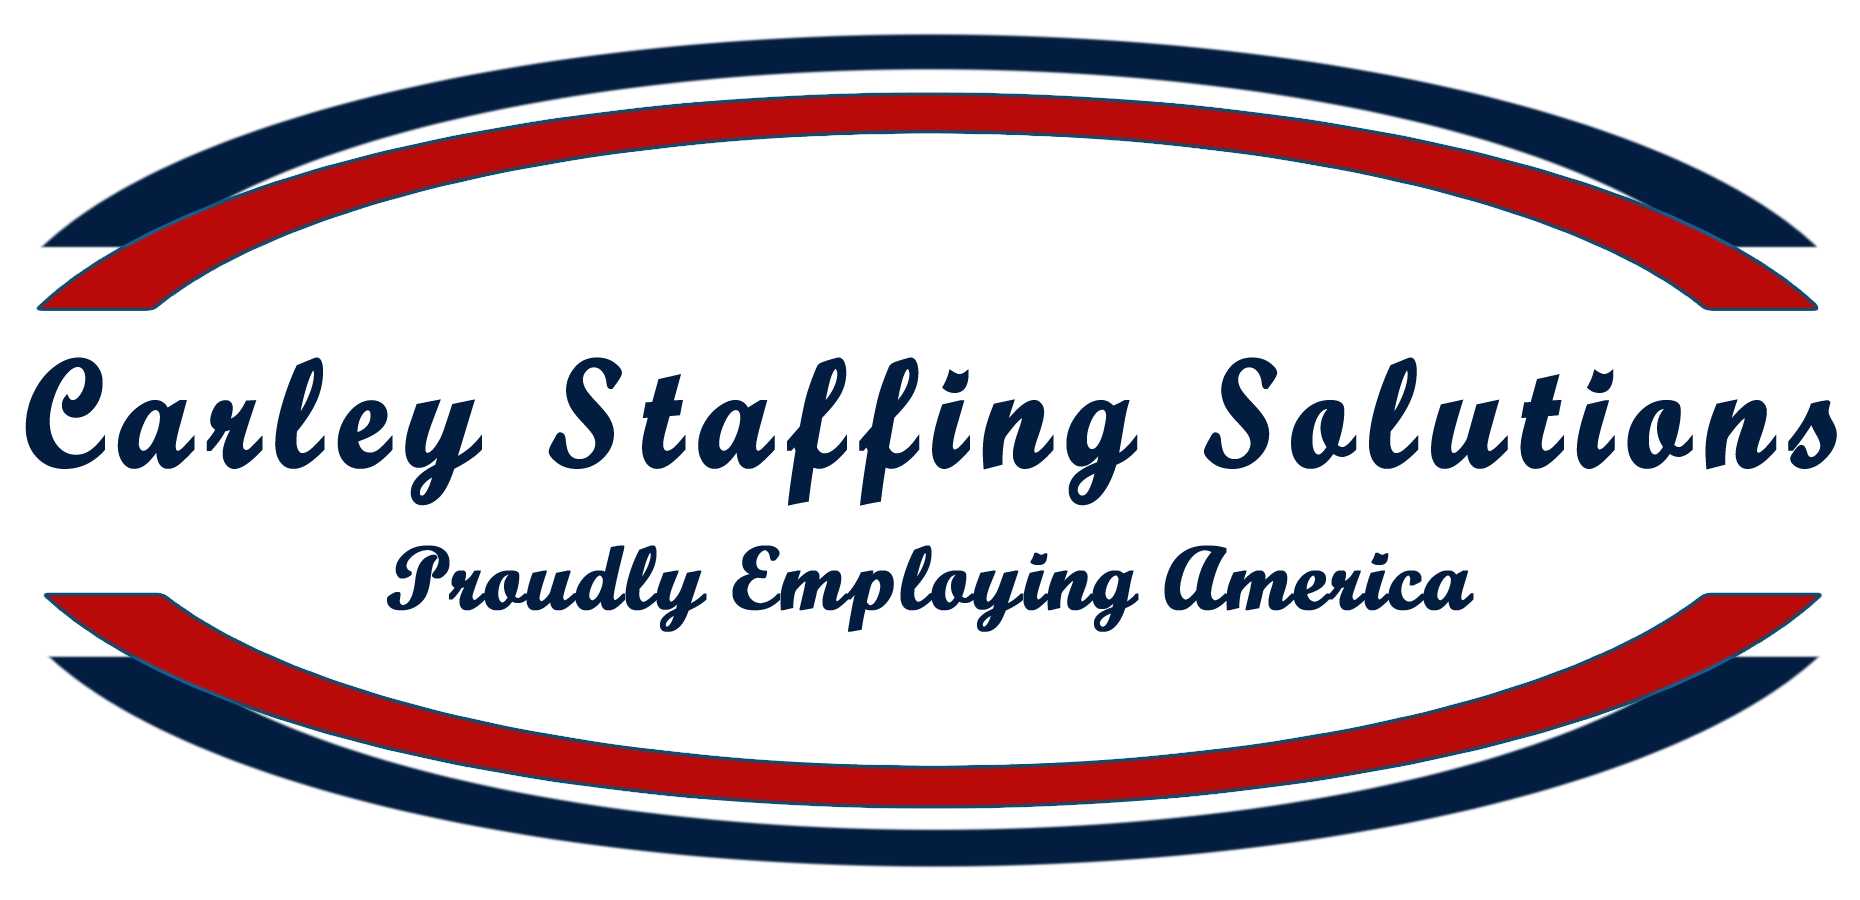 staffing agency rochester ny,employment agencies rochester ny,employment opportunities rochester ny,jobs rochester ny,CDL Jobs rochester ny